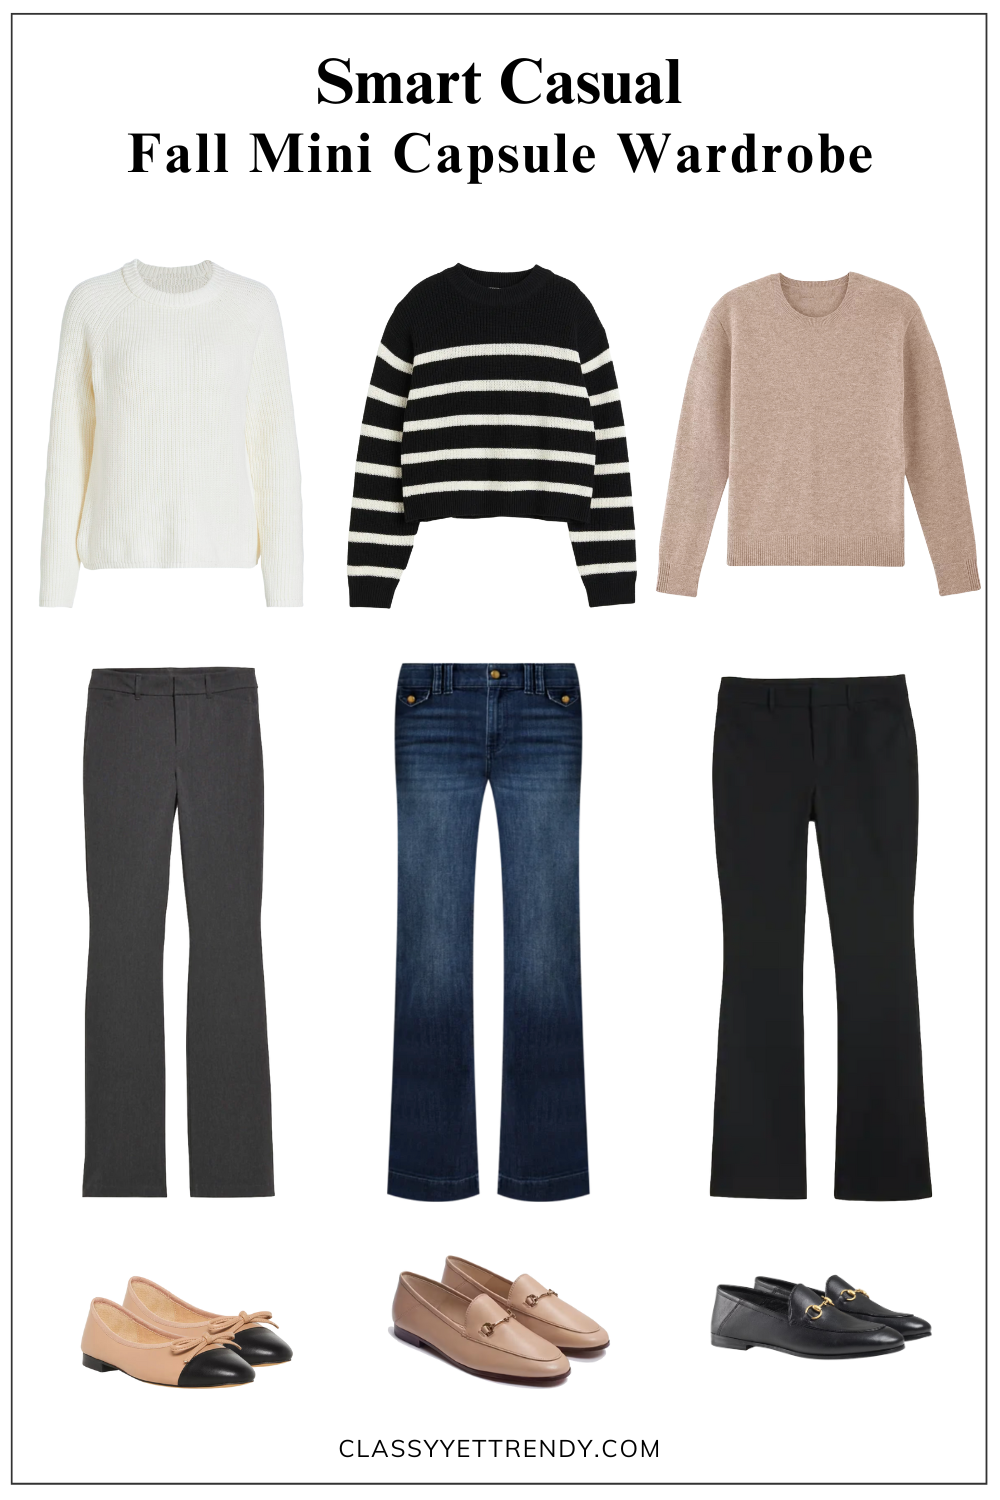 How To Create A Smart-Casual Capsule Wardrobe: 10 Pieces / 9